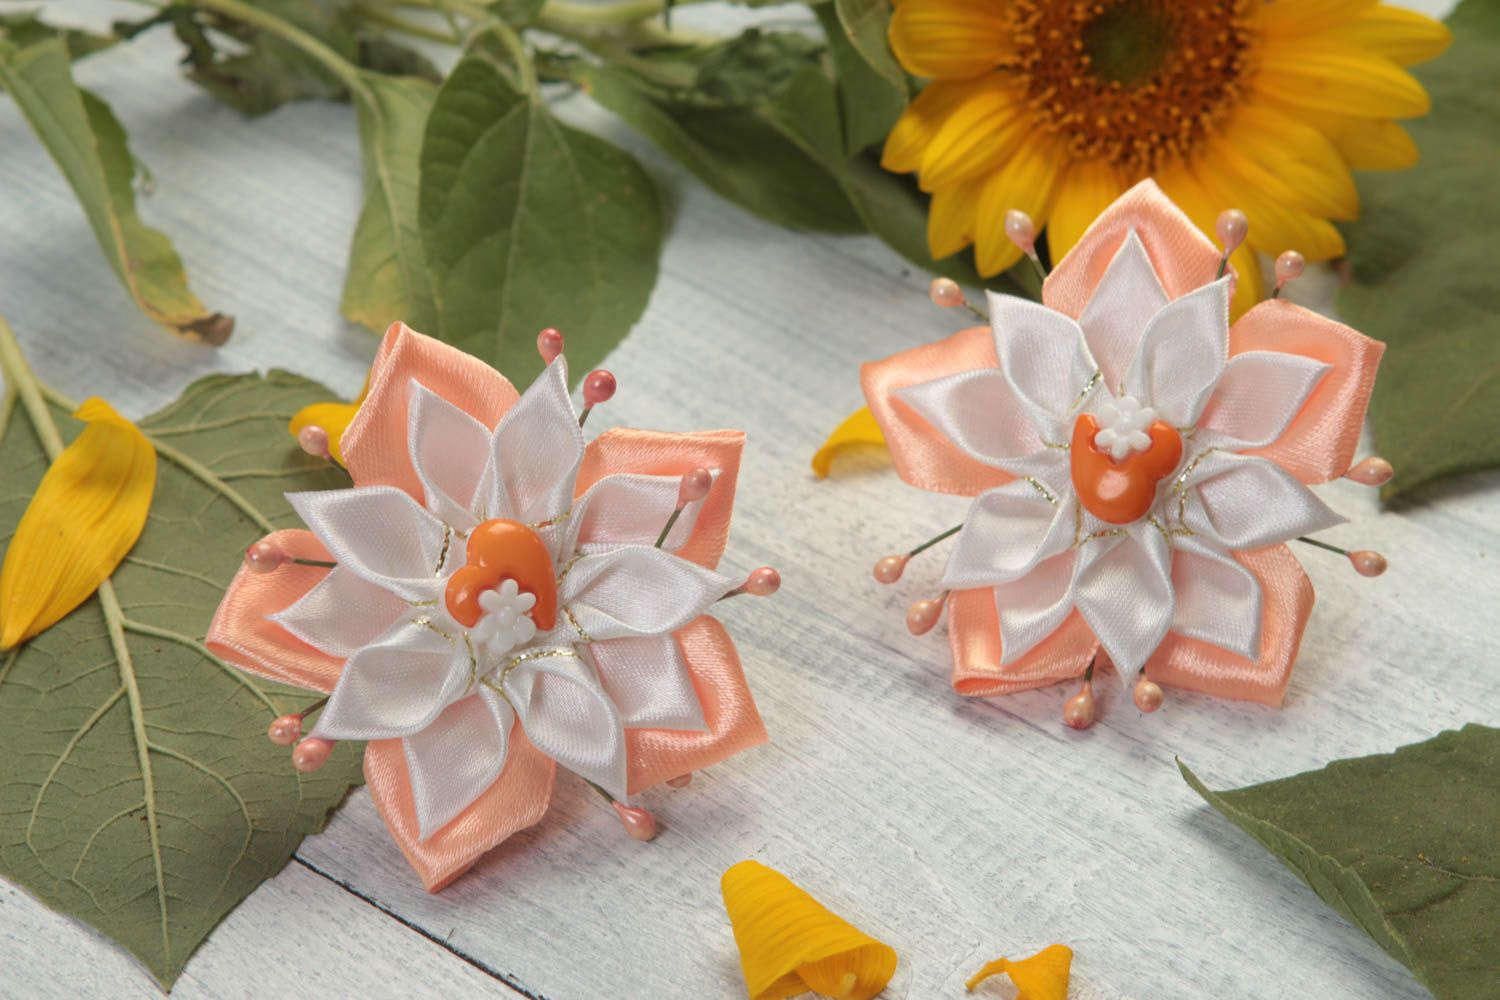 Set of flower hair accessories 2 hair ties kanzashi flowers gifts for girls photo 1